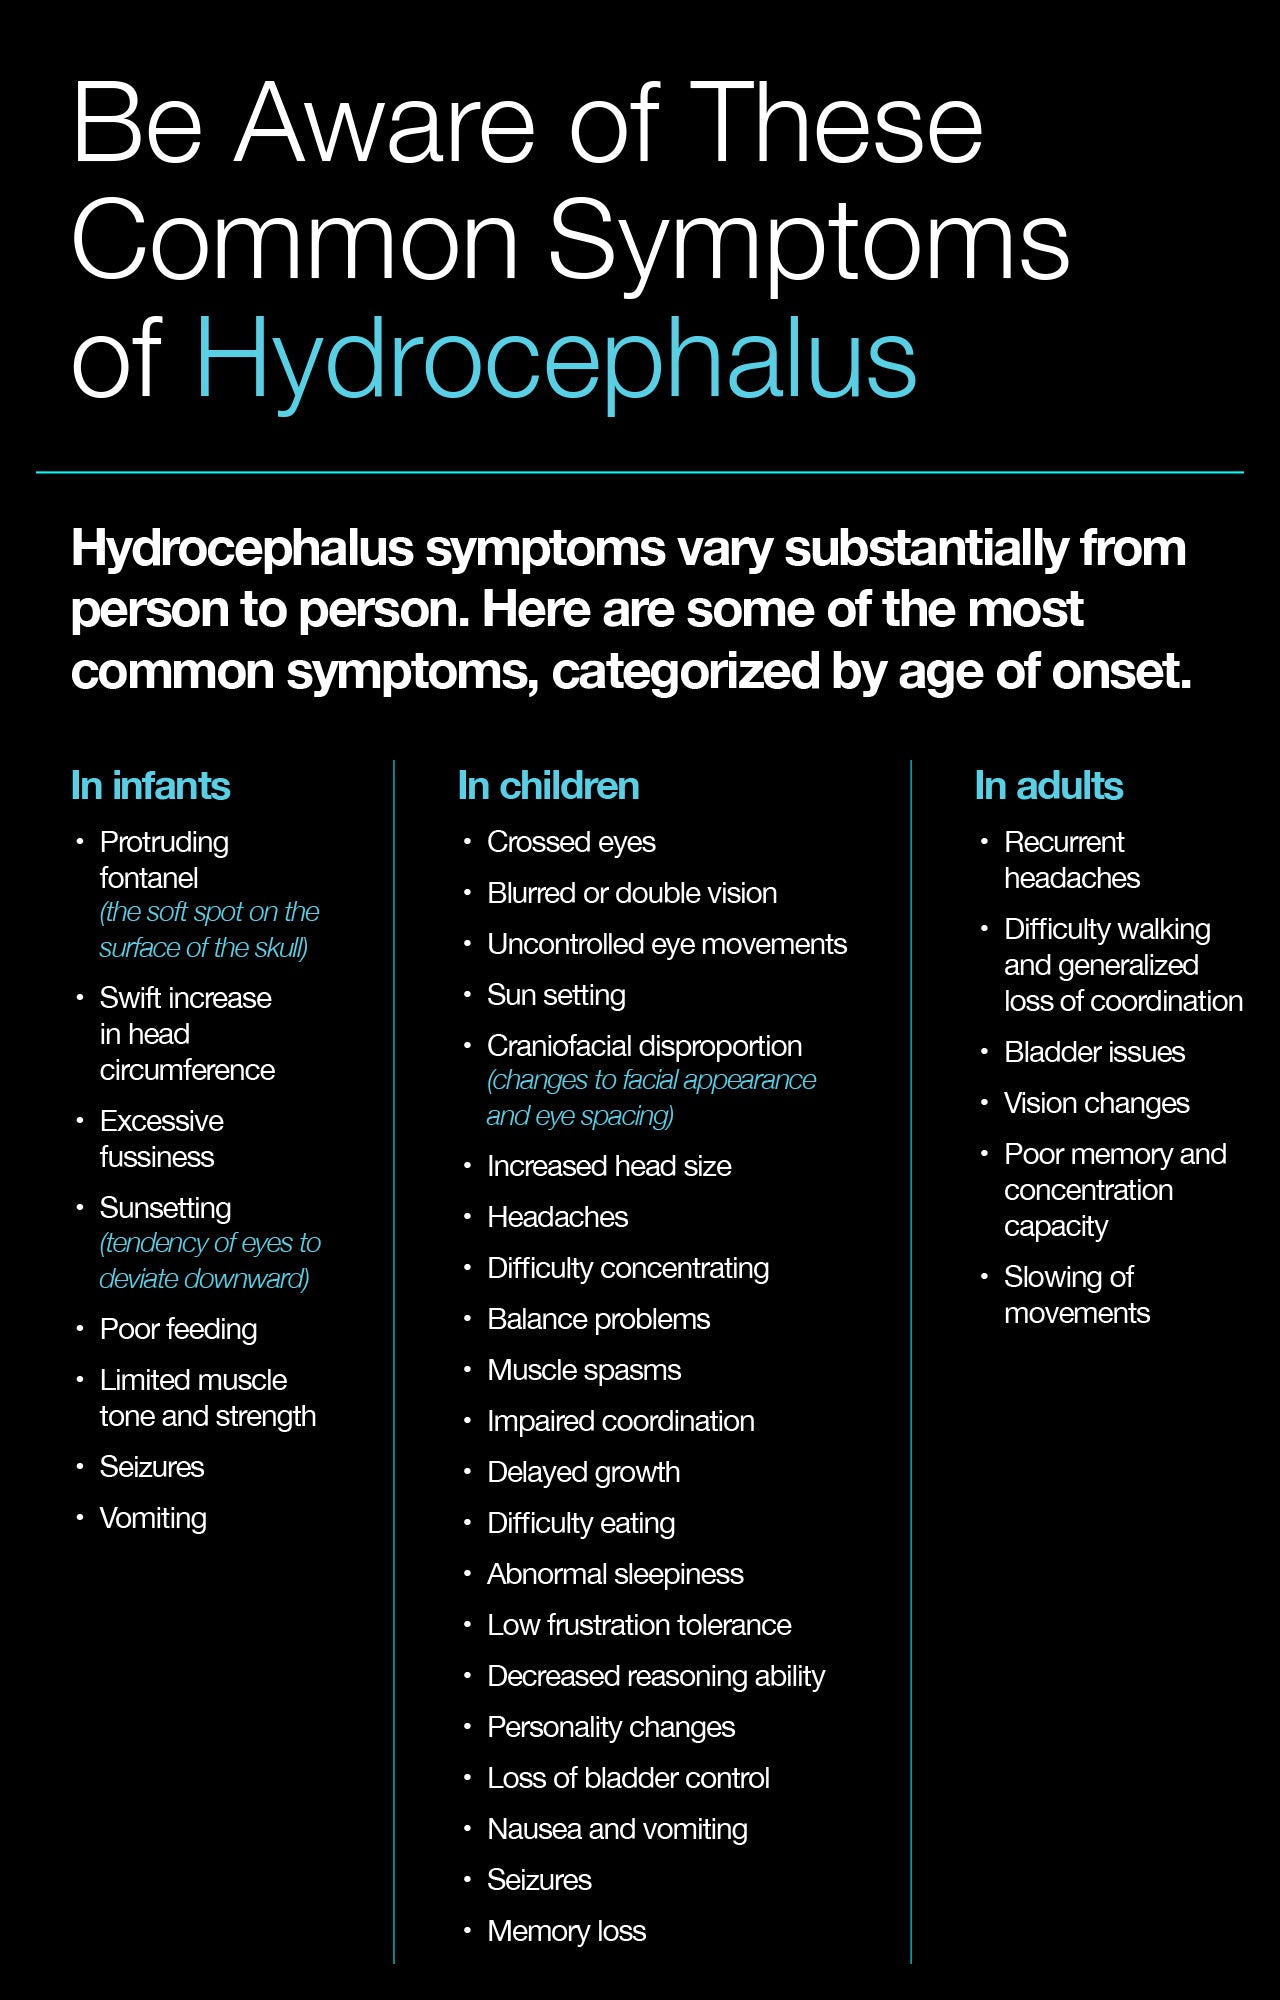 Be Aware of These Common Symptoms of Hydrocephalus